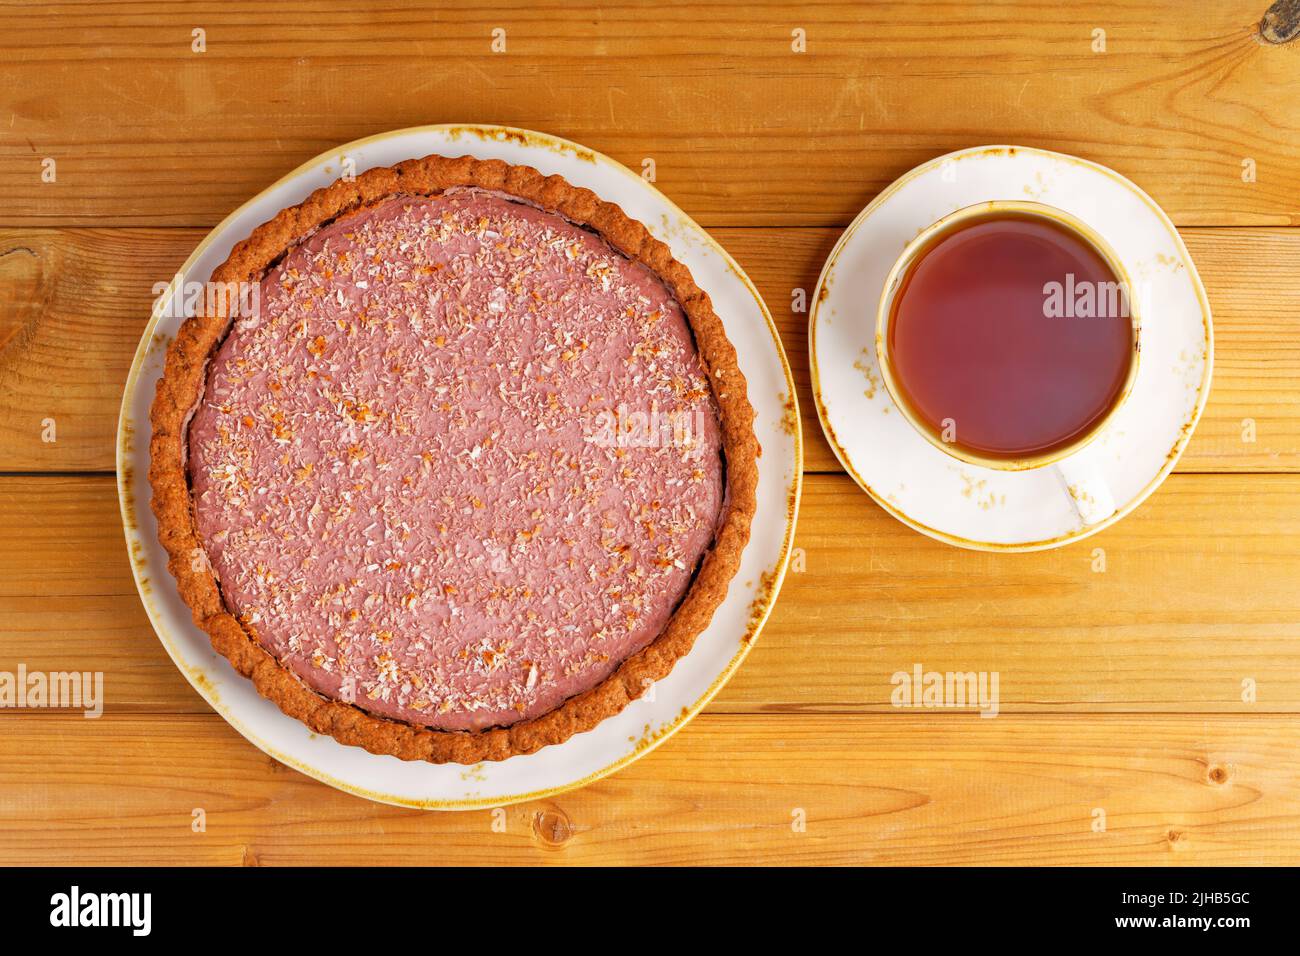 Homemade raspberry and banana pie and cup of tea on wooden table. Top view. Stock Photo